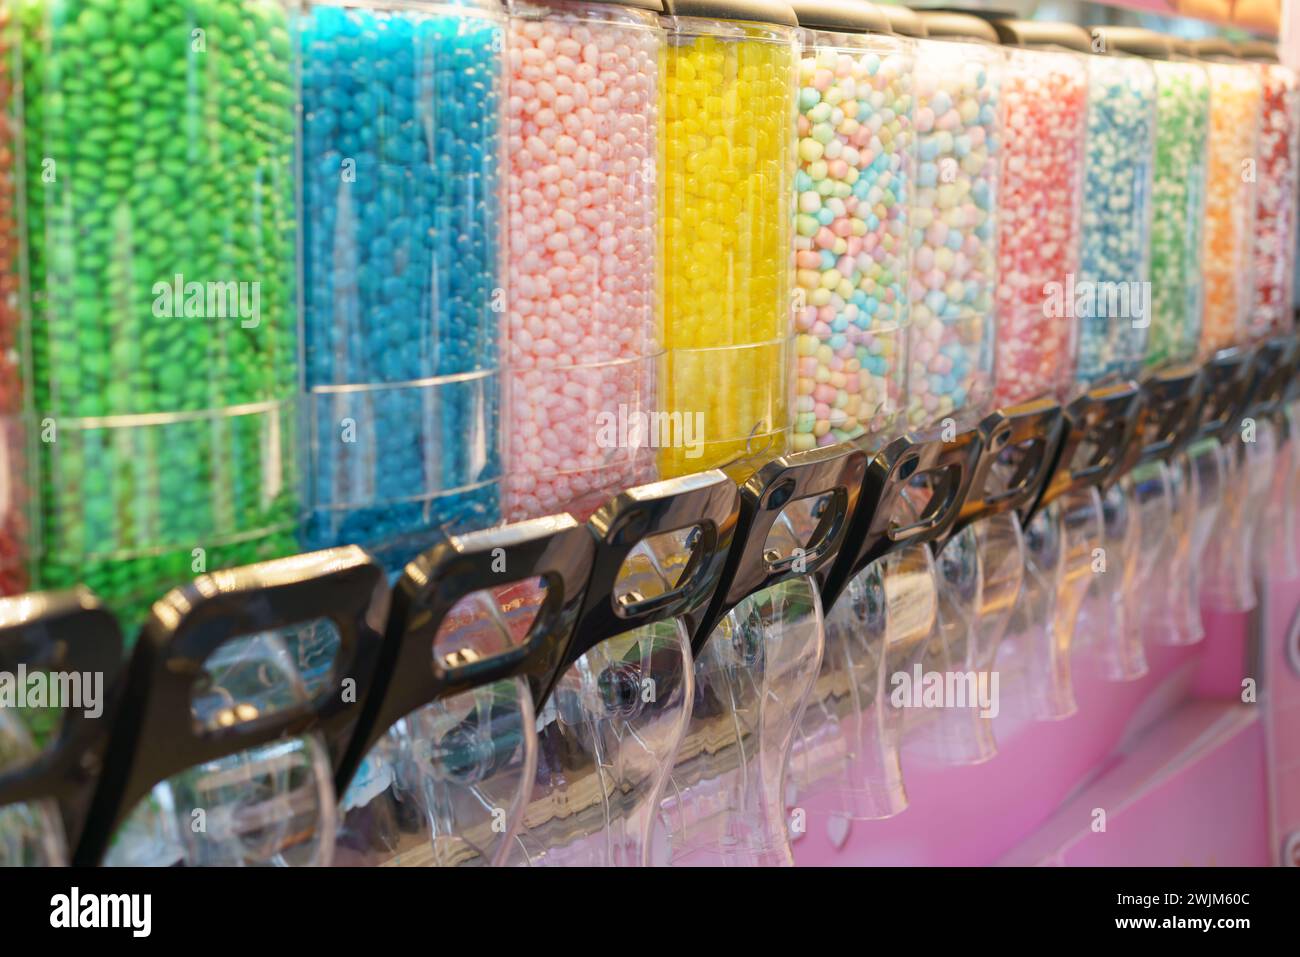 A vibrant display of candy dispensers filled with a variety of colorful sweets, offering a delightful choice for those with a sweet tooth Stock Photo